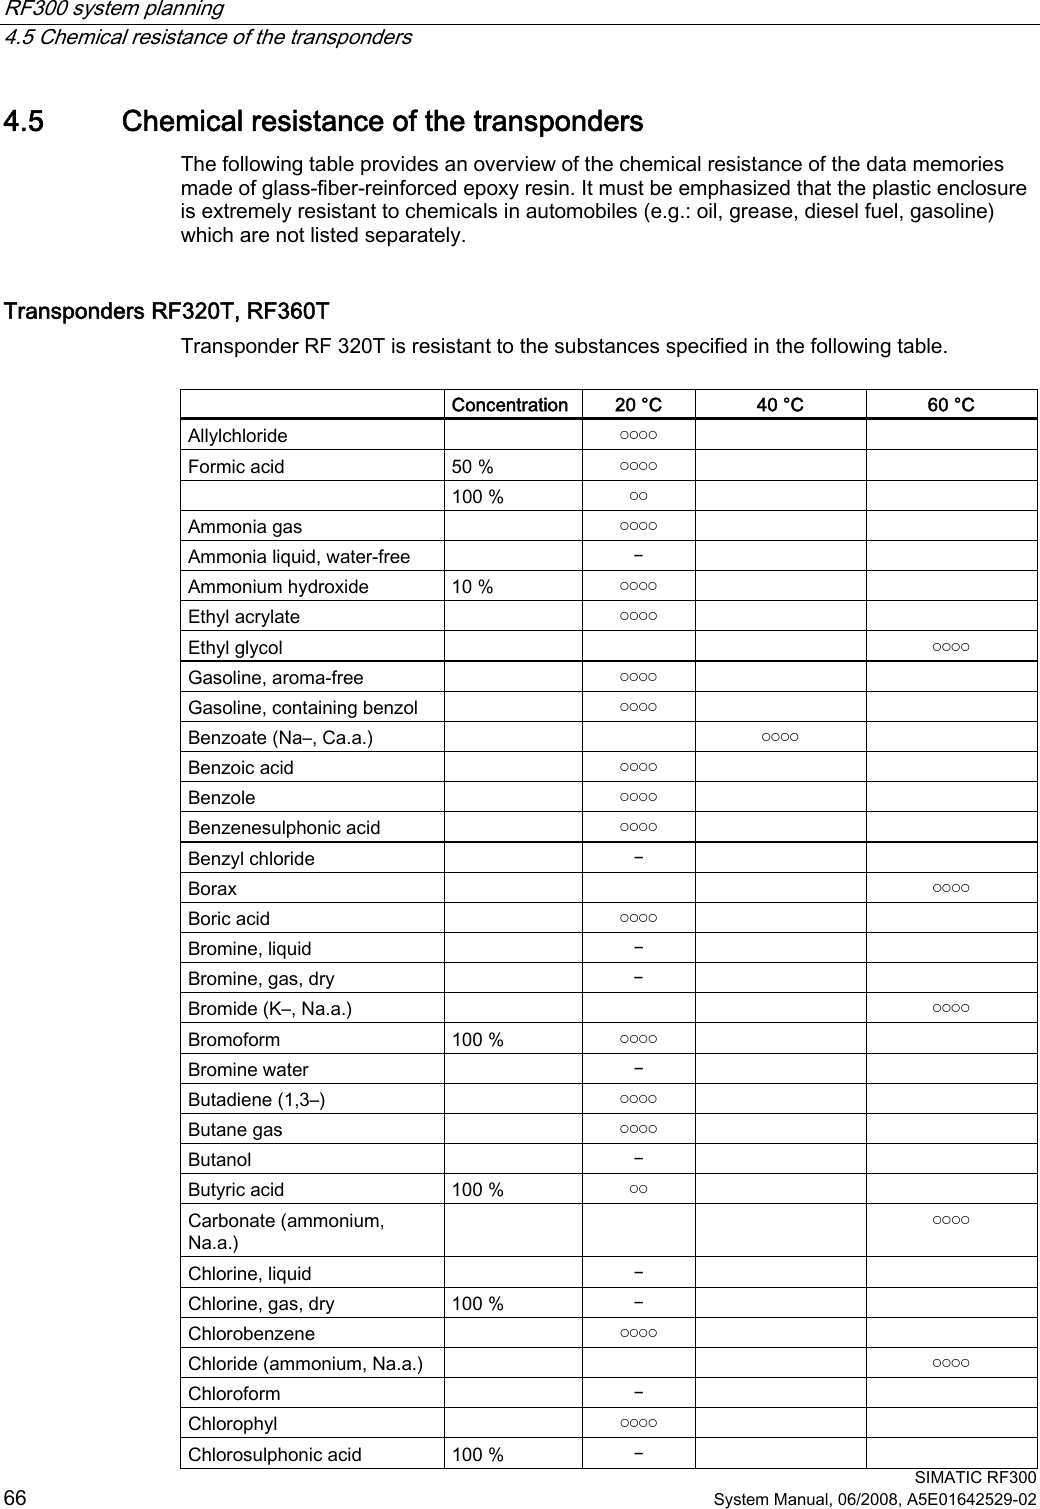 RF300 system planning   4.5 Chemical resistance of the transponders  SIMATIC RF300 66 System Manual, 06/2008, A5E01642529-02 4.5 Chemical resistance of the transponders The following table provides an overview of the chemical resistance of the data memories made of glass-fiber-reinforced epoxy resin. It must be emphasized that the plastic enclosure is extremely resistant to chemicals in automobiles (e.g.: oil, grease, diesel fuel, gasoline) which are not listed separately.  Transponders RF320T, RF360T Transponder RF 320T is resistant to the substances specified in the following table.    Concentration  20 °C  40 °C  60 °C Allylchloride    ￮￮￮￮     Formic acid  50 %  ￮￮￮￮       100 %  ￮￮     Ammonia gas    ￮￮￮￮     Ammonia liquid, water-free    ￚ     Ammonium hydroxide  10 %  ￮￮￮￮     Ethyl acrylate    ￮￮￮￮     Ethyl glycol        ￮￮￮￮ Gasoline, aroma-free    ￮￮￮￮     Gasoline, containing benzol    ￮￮￮￮     Benzoate (Na–, Ca.a.)      ￮￮￮￮   Benzoic acid    ￮￮￮￮     Benzole    ￮￮￮￮     Benzenesulphonic acid    ￮￮￮￮     Benzyl chloride    ￚ     Borax        ￮￮￮￮ Boric acid    ￮￮￮￮     Bromine, liquid    ￚ     Bromine, gas, dry    ￚ     Bromide (K–, Na.a.)        ￮￮￮￮ Bromoform  100 %  ￮￮￮￮     Bromine water    ￚ     Butadiene (1,3–)    ￮￮￮￮     Butane gas    ￮￮￮￮     Butanol    ￚ     Butyric acid  100 %  ￮￮     Carbonate (ammonium, Na.a.)       ￮￮￮￮ Chlorine, liquid    ￚ     Chlorine, gas, dry  100 %  ￚ     Chlorobenzene    ￮￮￮￮     Chloride (ammonium, Na.a.)        ￮￮￮￮ Chloroform    ￚ     Chlorophyl    ￮￮￮￮     Chlorosulphonic acid  100 %  ￚ     